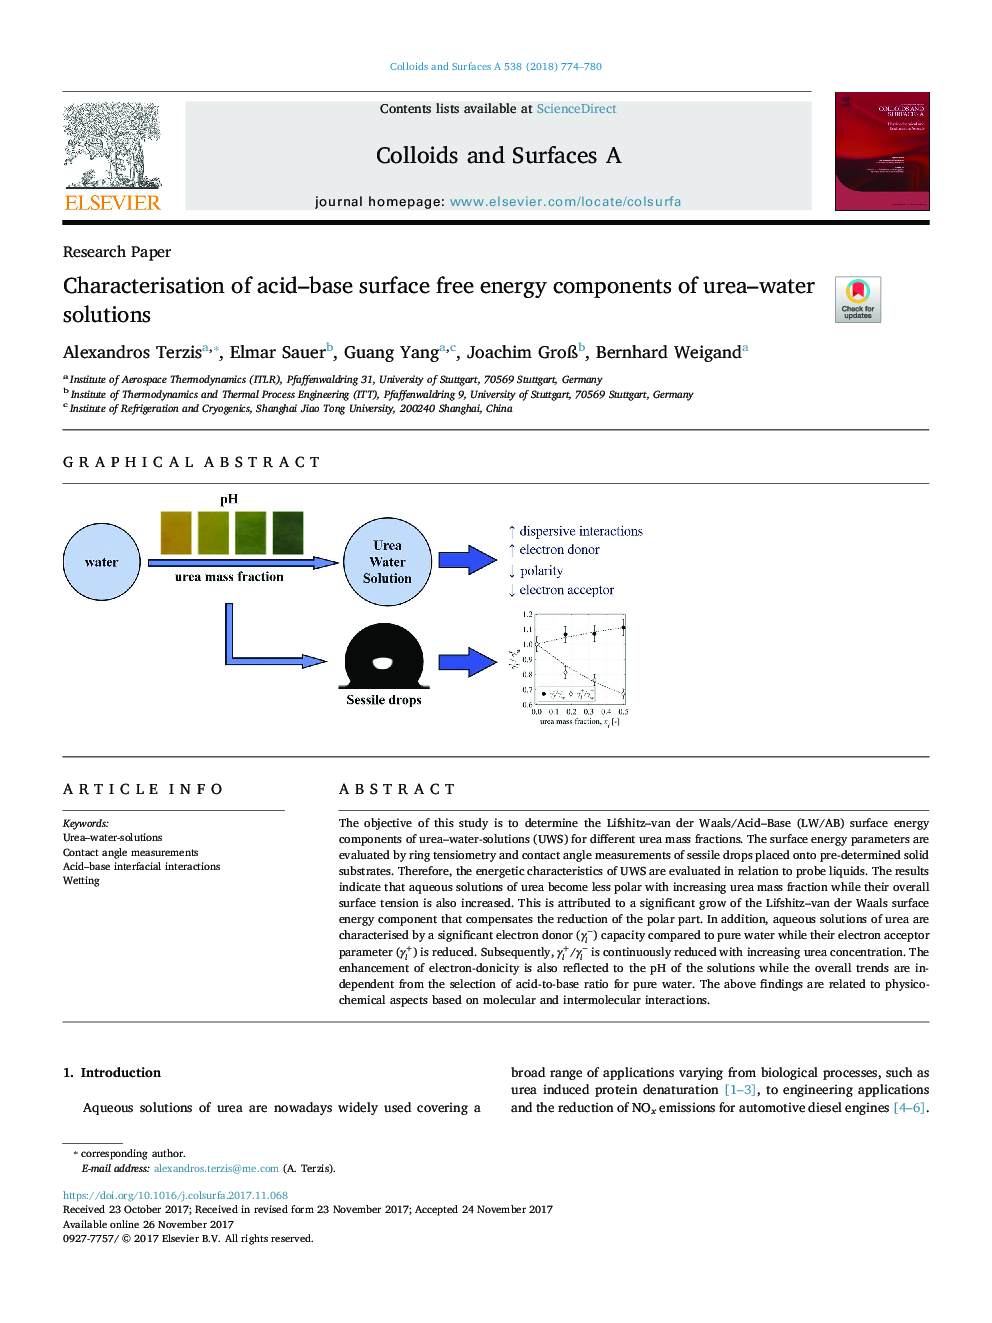 Characterisation of acid-base surface free energy components of urea-water solutions